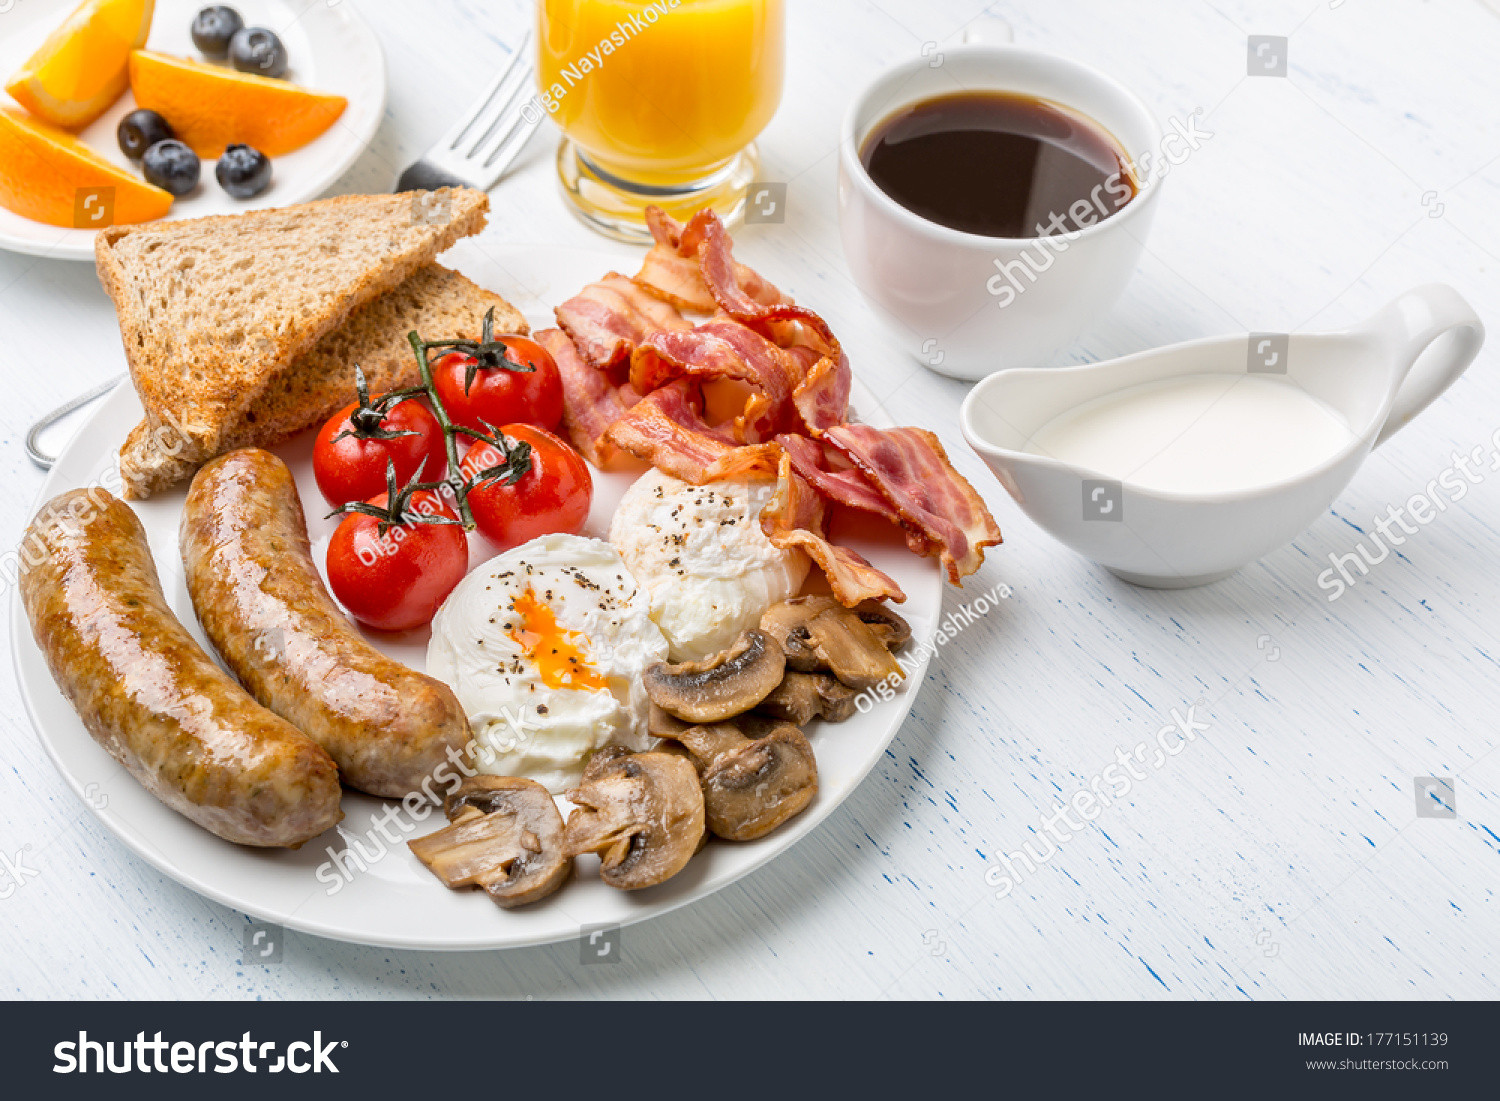 Healthy Bacon Breakfast
 Healthy Full English Breakfast Plate With Poached Eggs